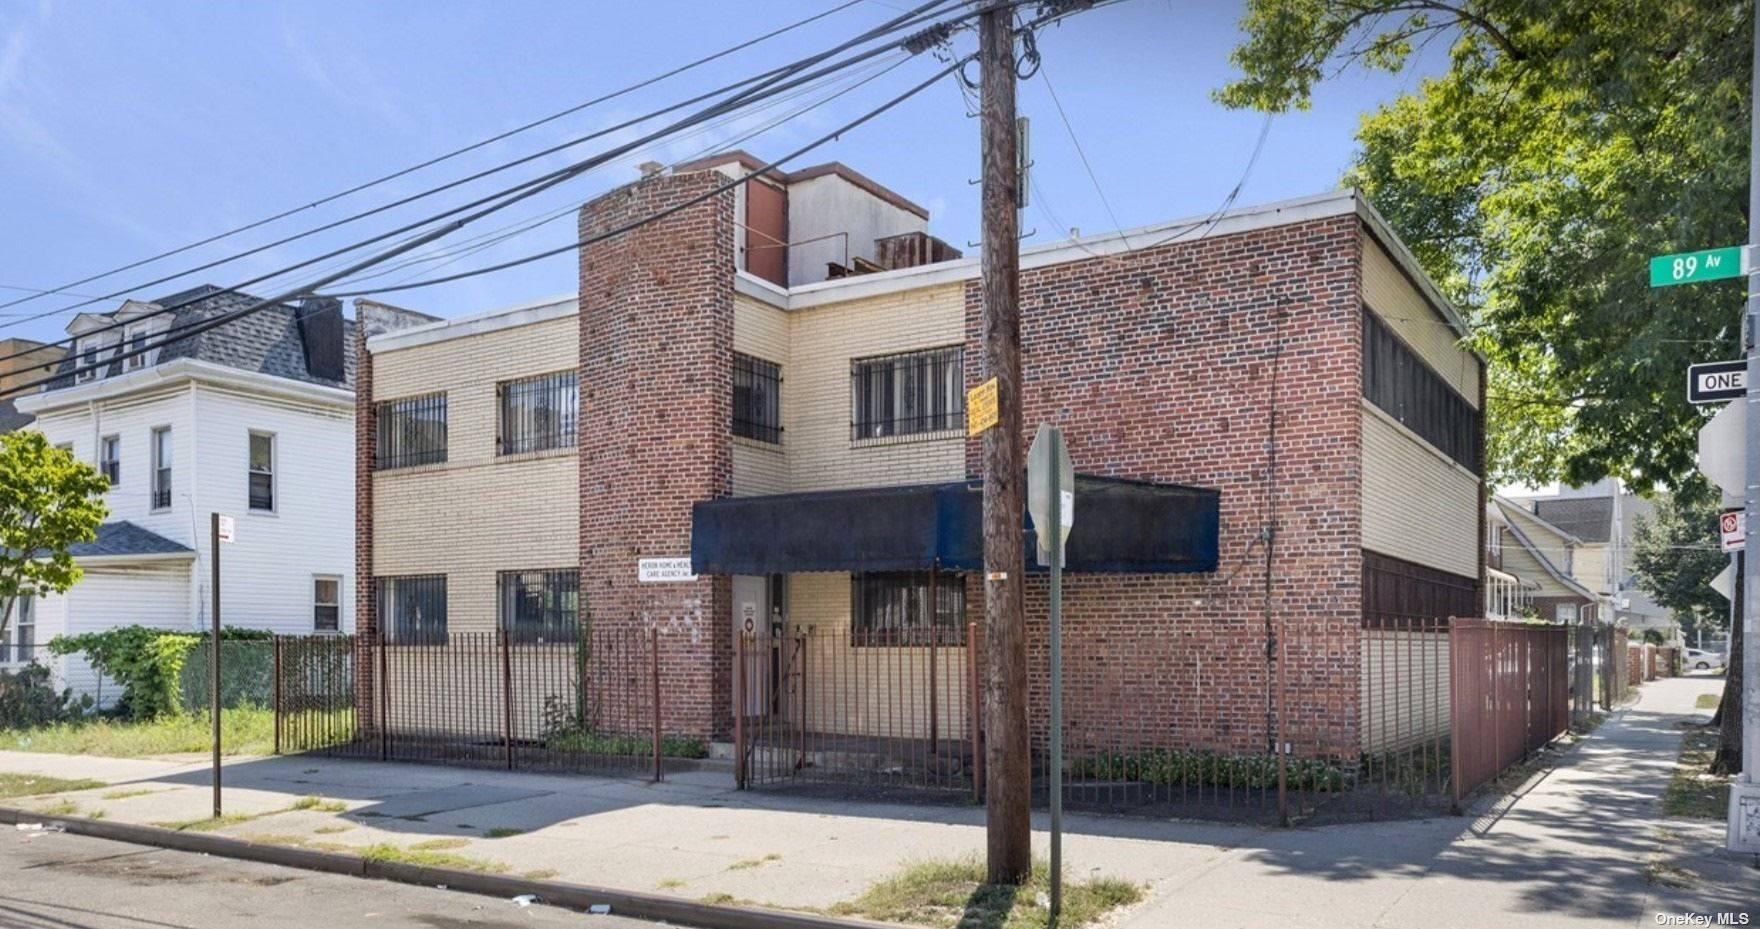 Property for LEASE Medical Center NYC APPROVED PLANS for residential for an ambitious corner lot expansion in the Jamaica Center area a 5 story building comprising 32 residential units revisions ...